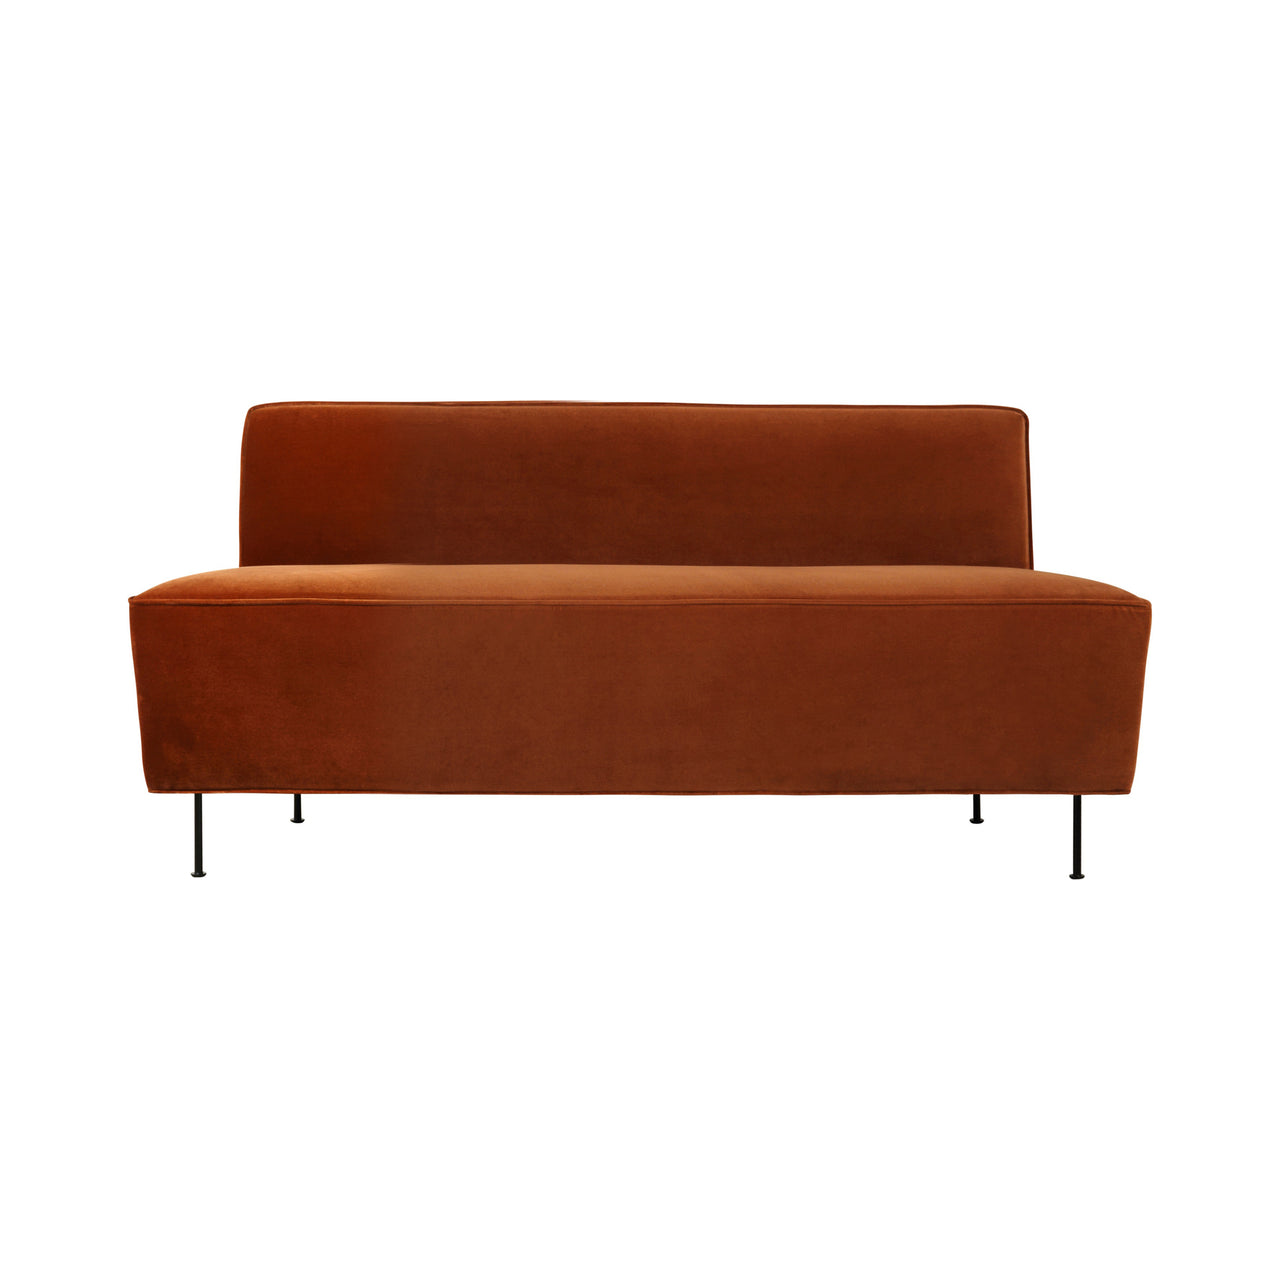 Modern Line Sofa: Dining Height + Small - 65